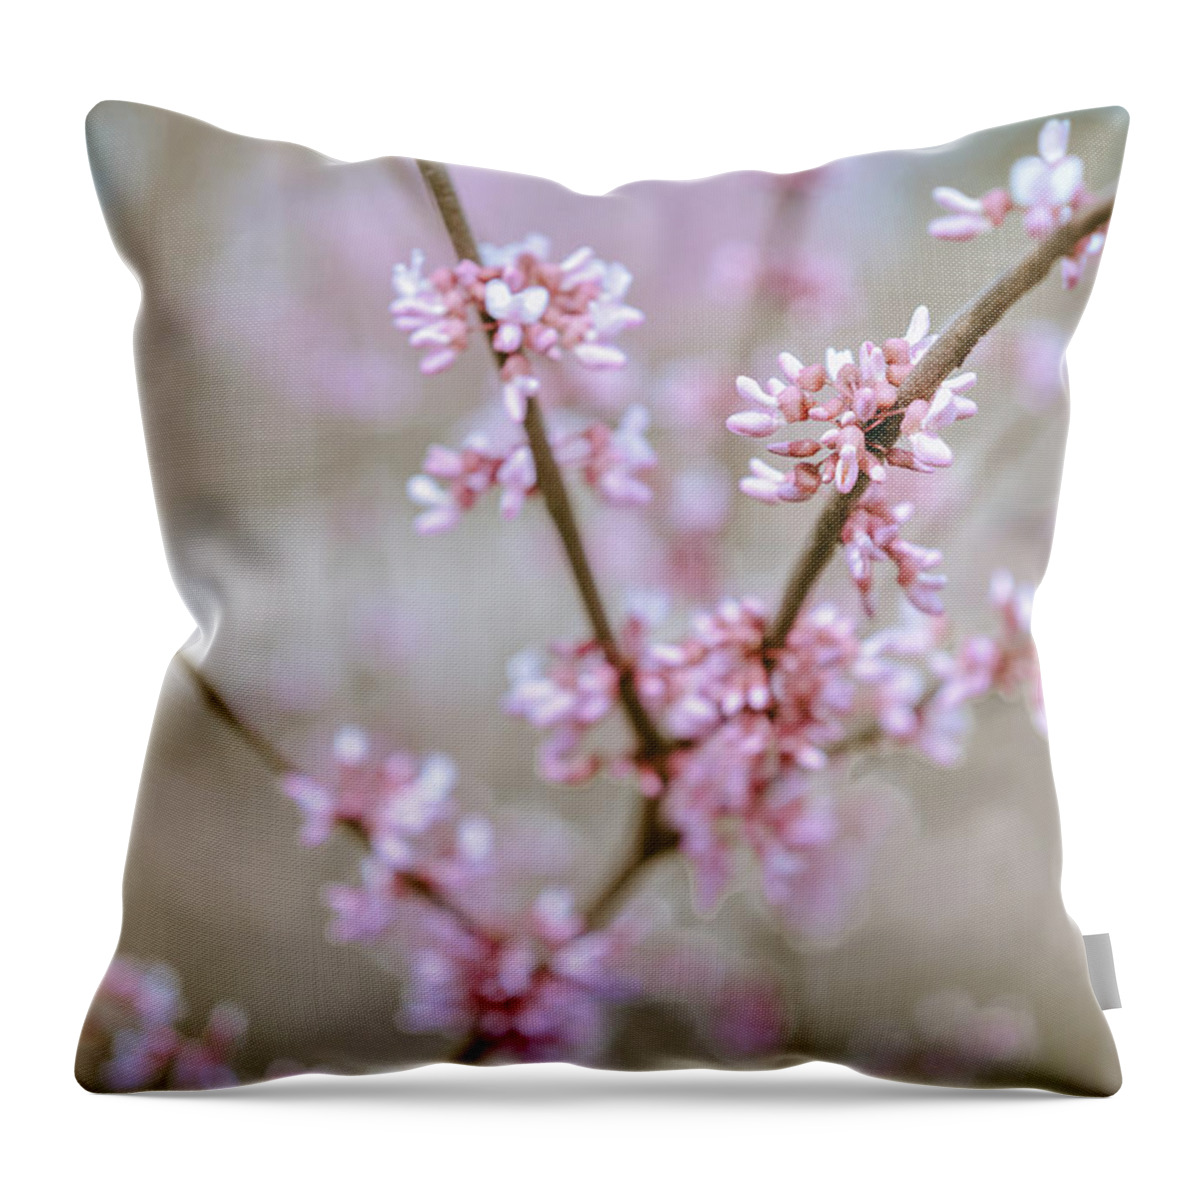 Redbud Blooms Throw Pillow featuring the photograph Red Buds by Michelle Wermuth